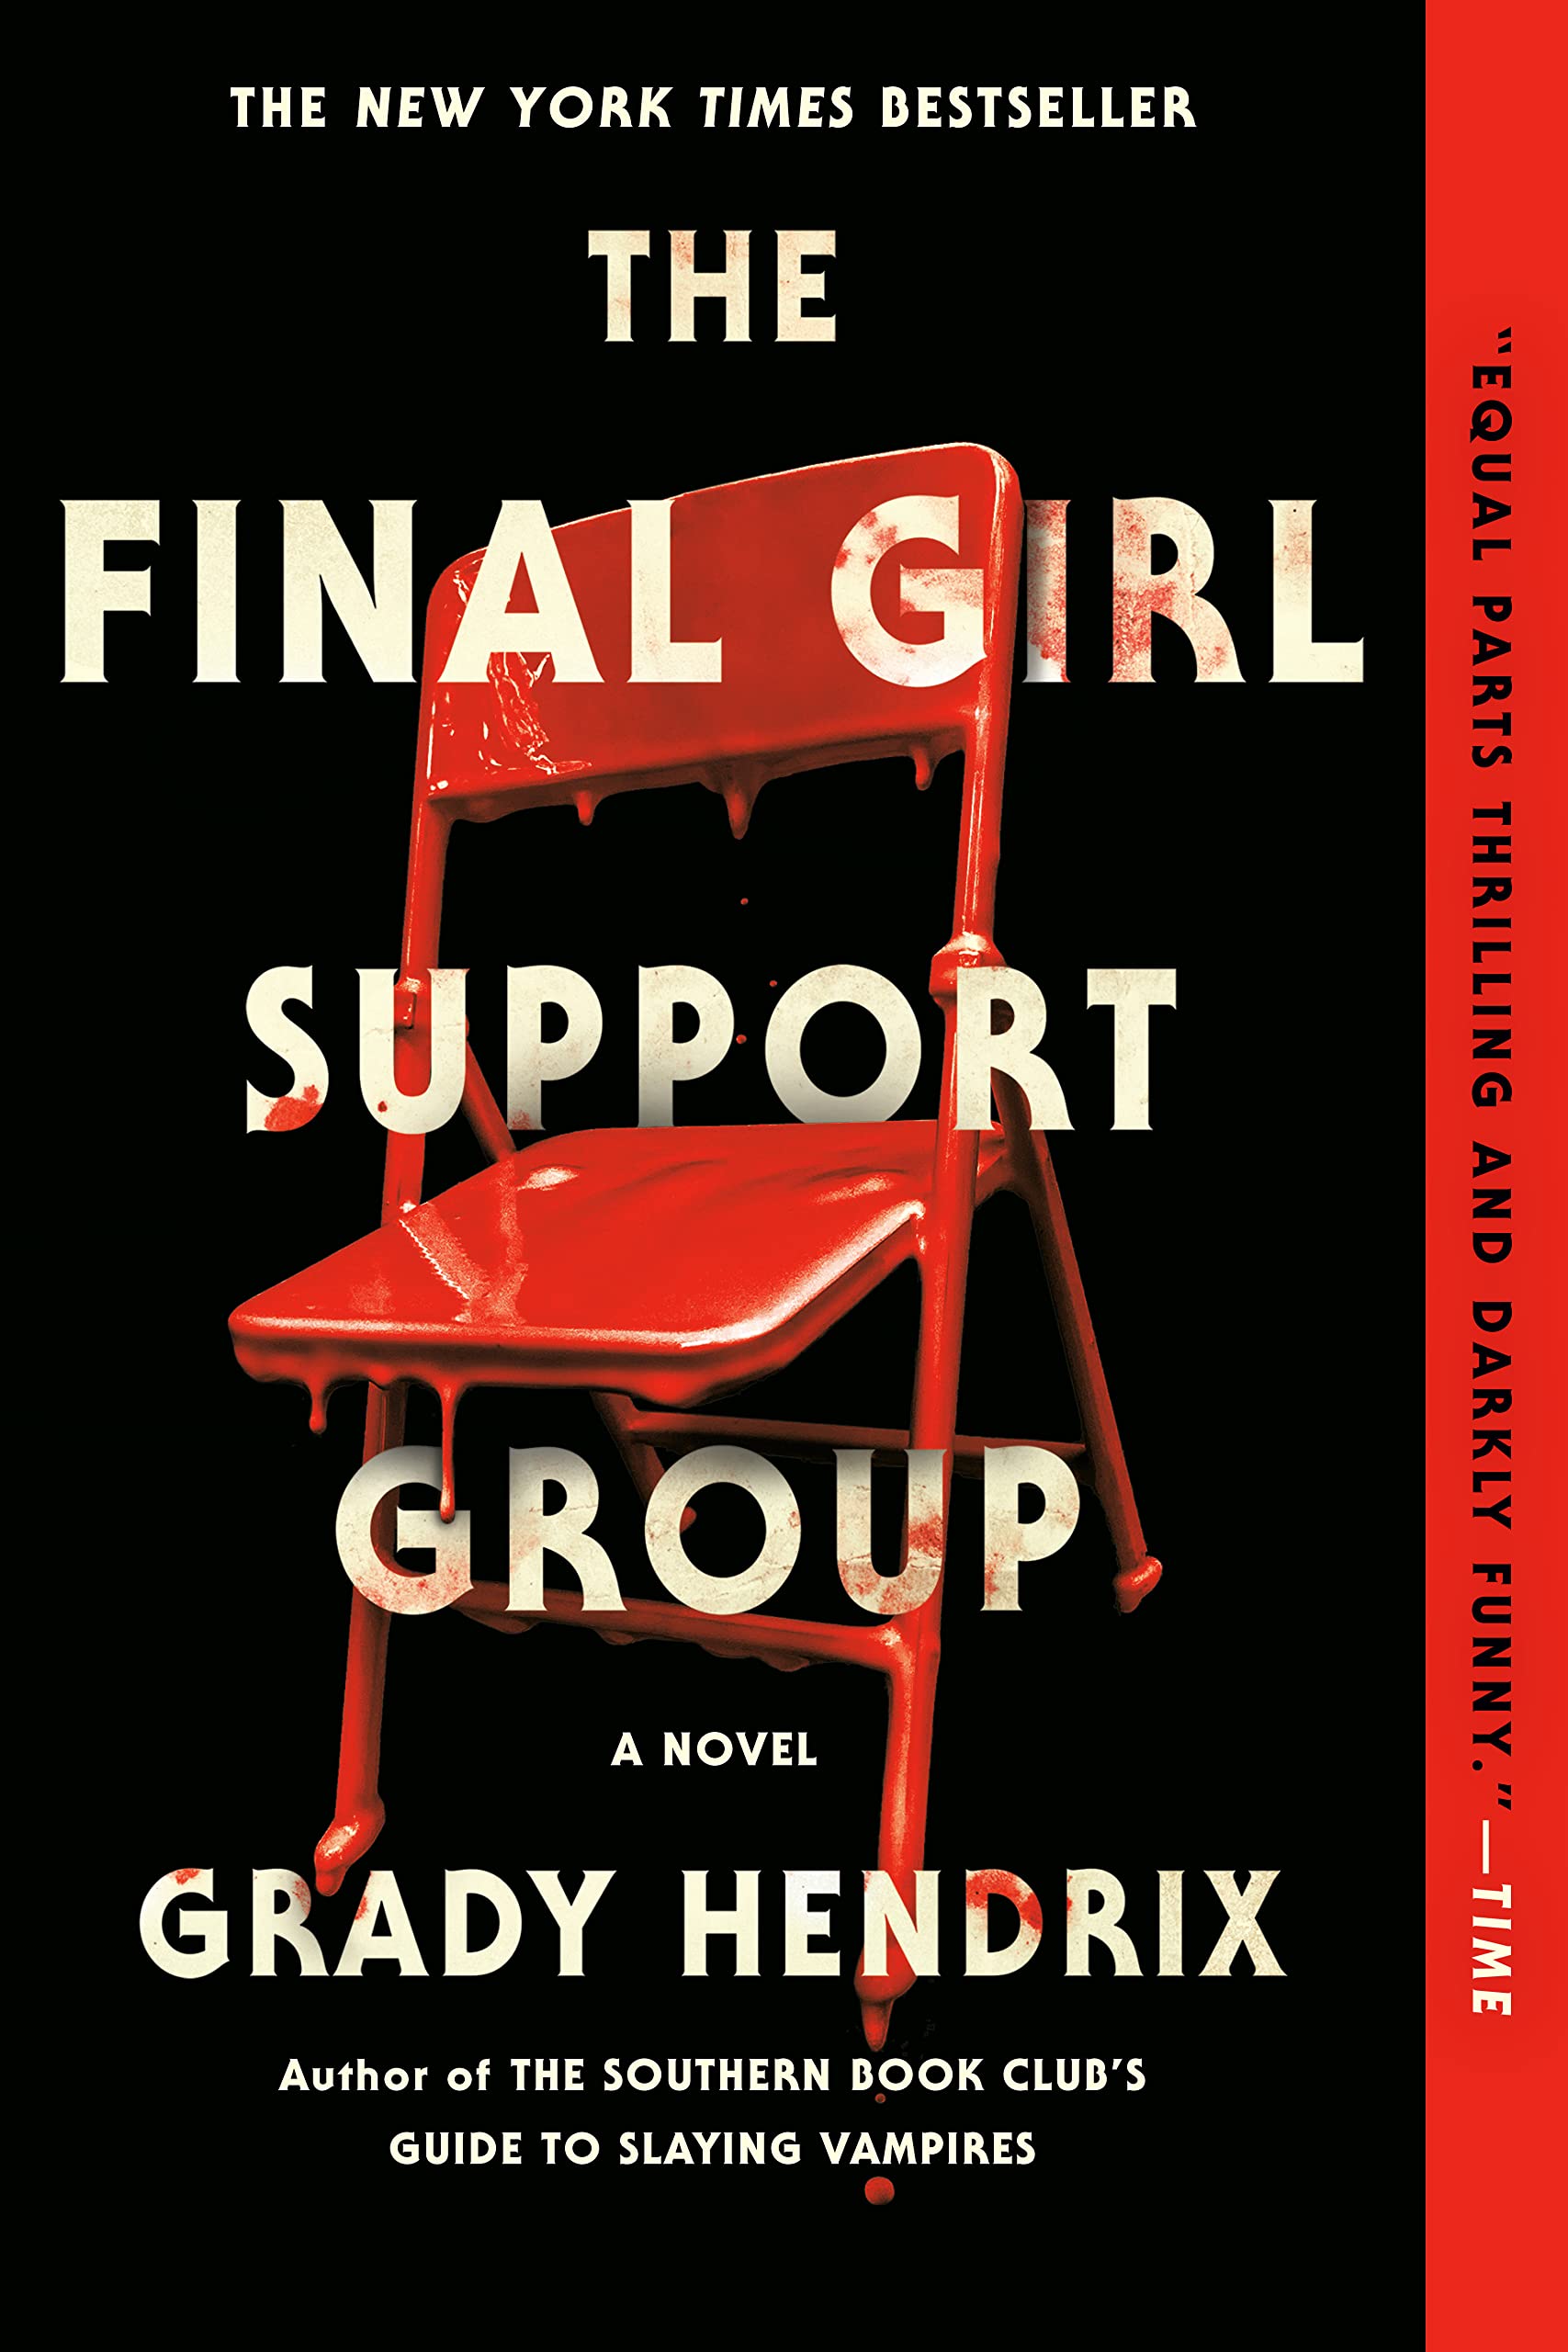 THE FINAL GIRLS SUPPORT GROUP by Grady Hendrix